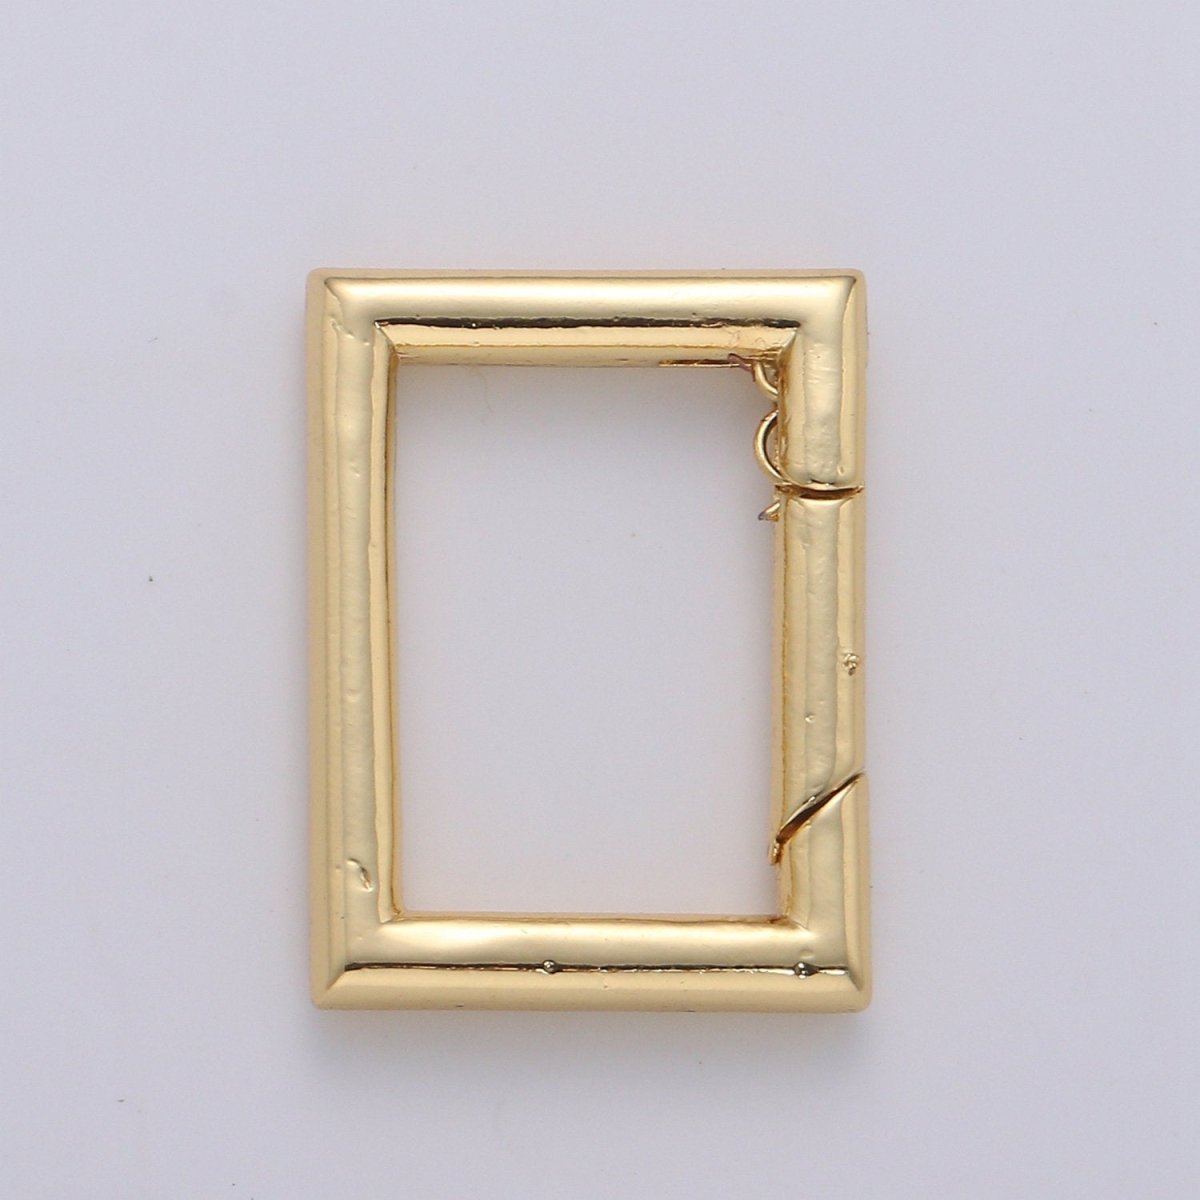 14K Gold Filled Square Shape Carabiner Clasp with Easy Open Spring, Square Spring Snap Clasp for Jewelry Making supply K-828 - DLUXCA